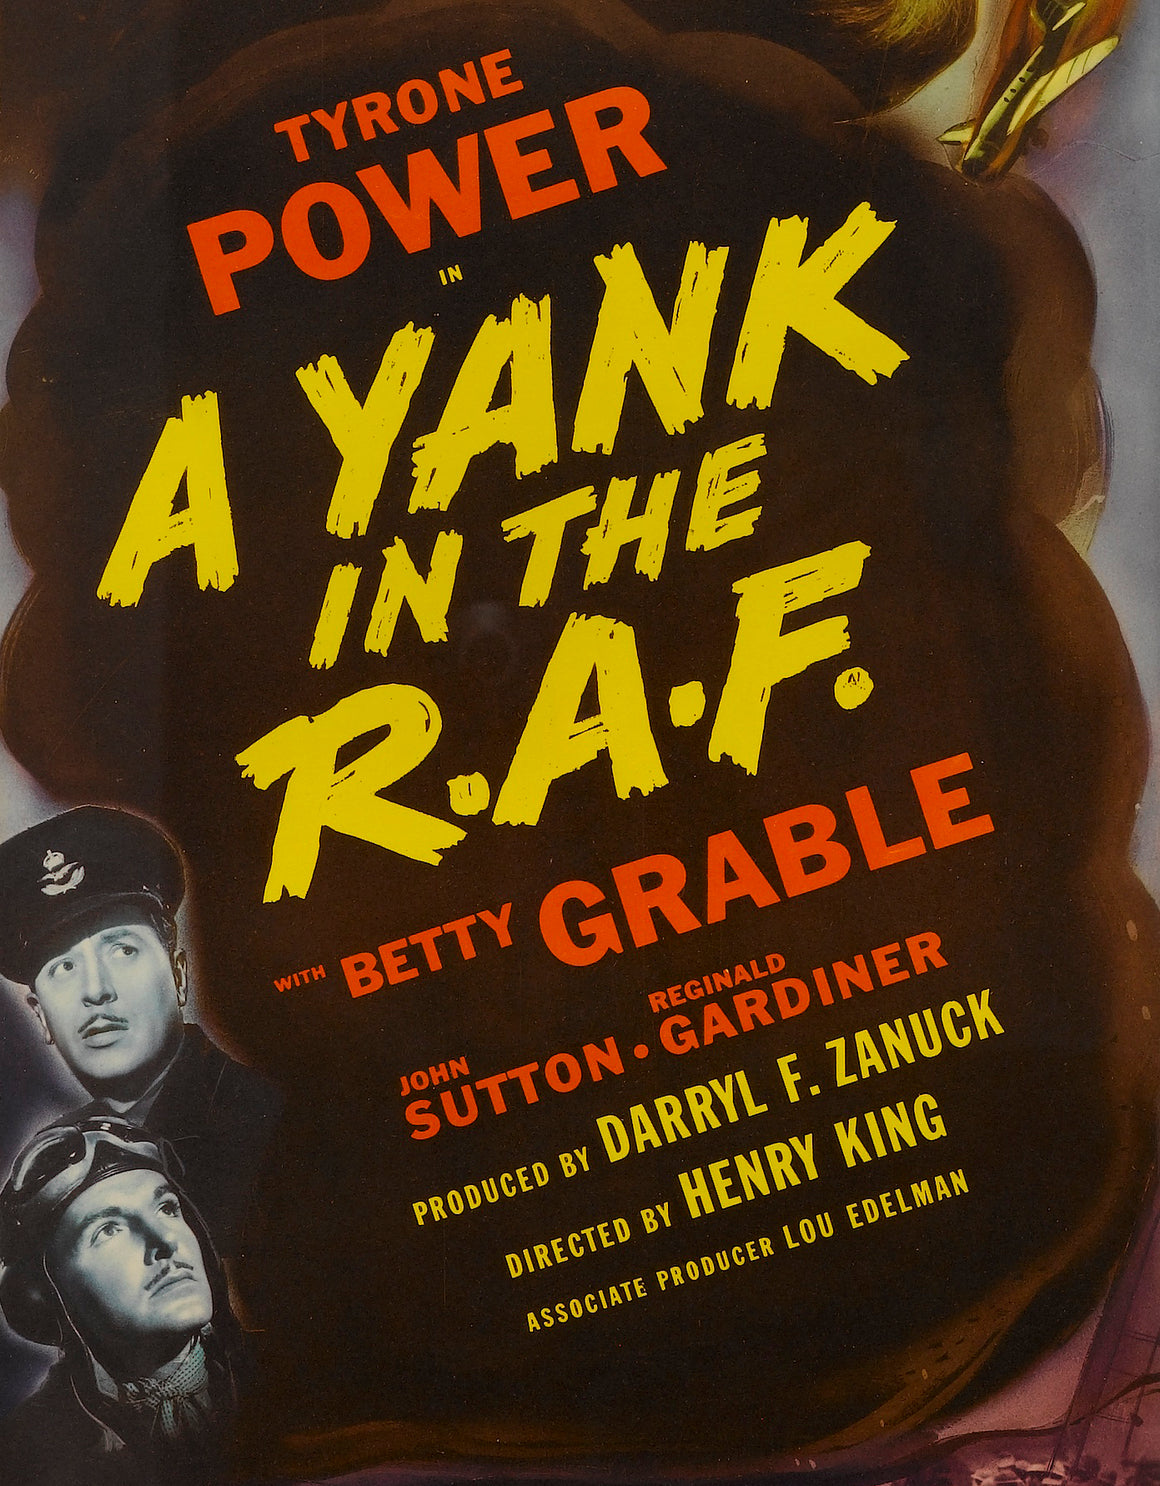 A Yank in the R.A.F. Movie Poster, Circa 1941 - The Great Republic